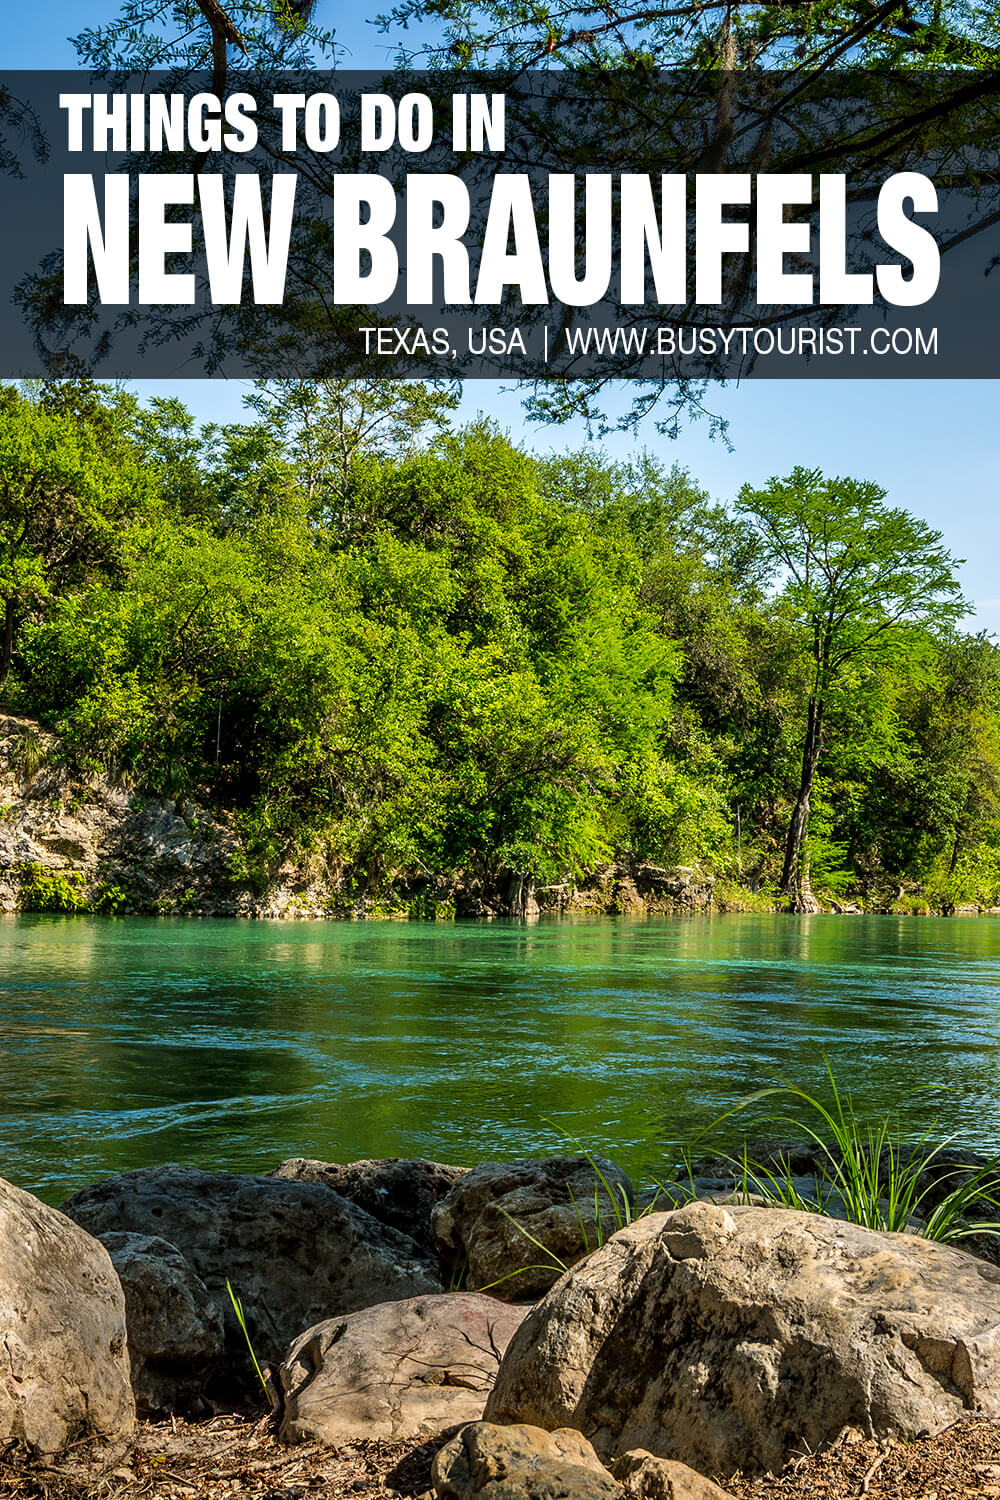 26 Best & Fun Things To Do In New Braunfels (TX) Attractions & Activities